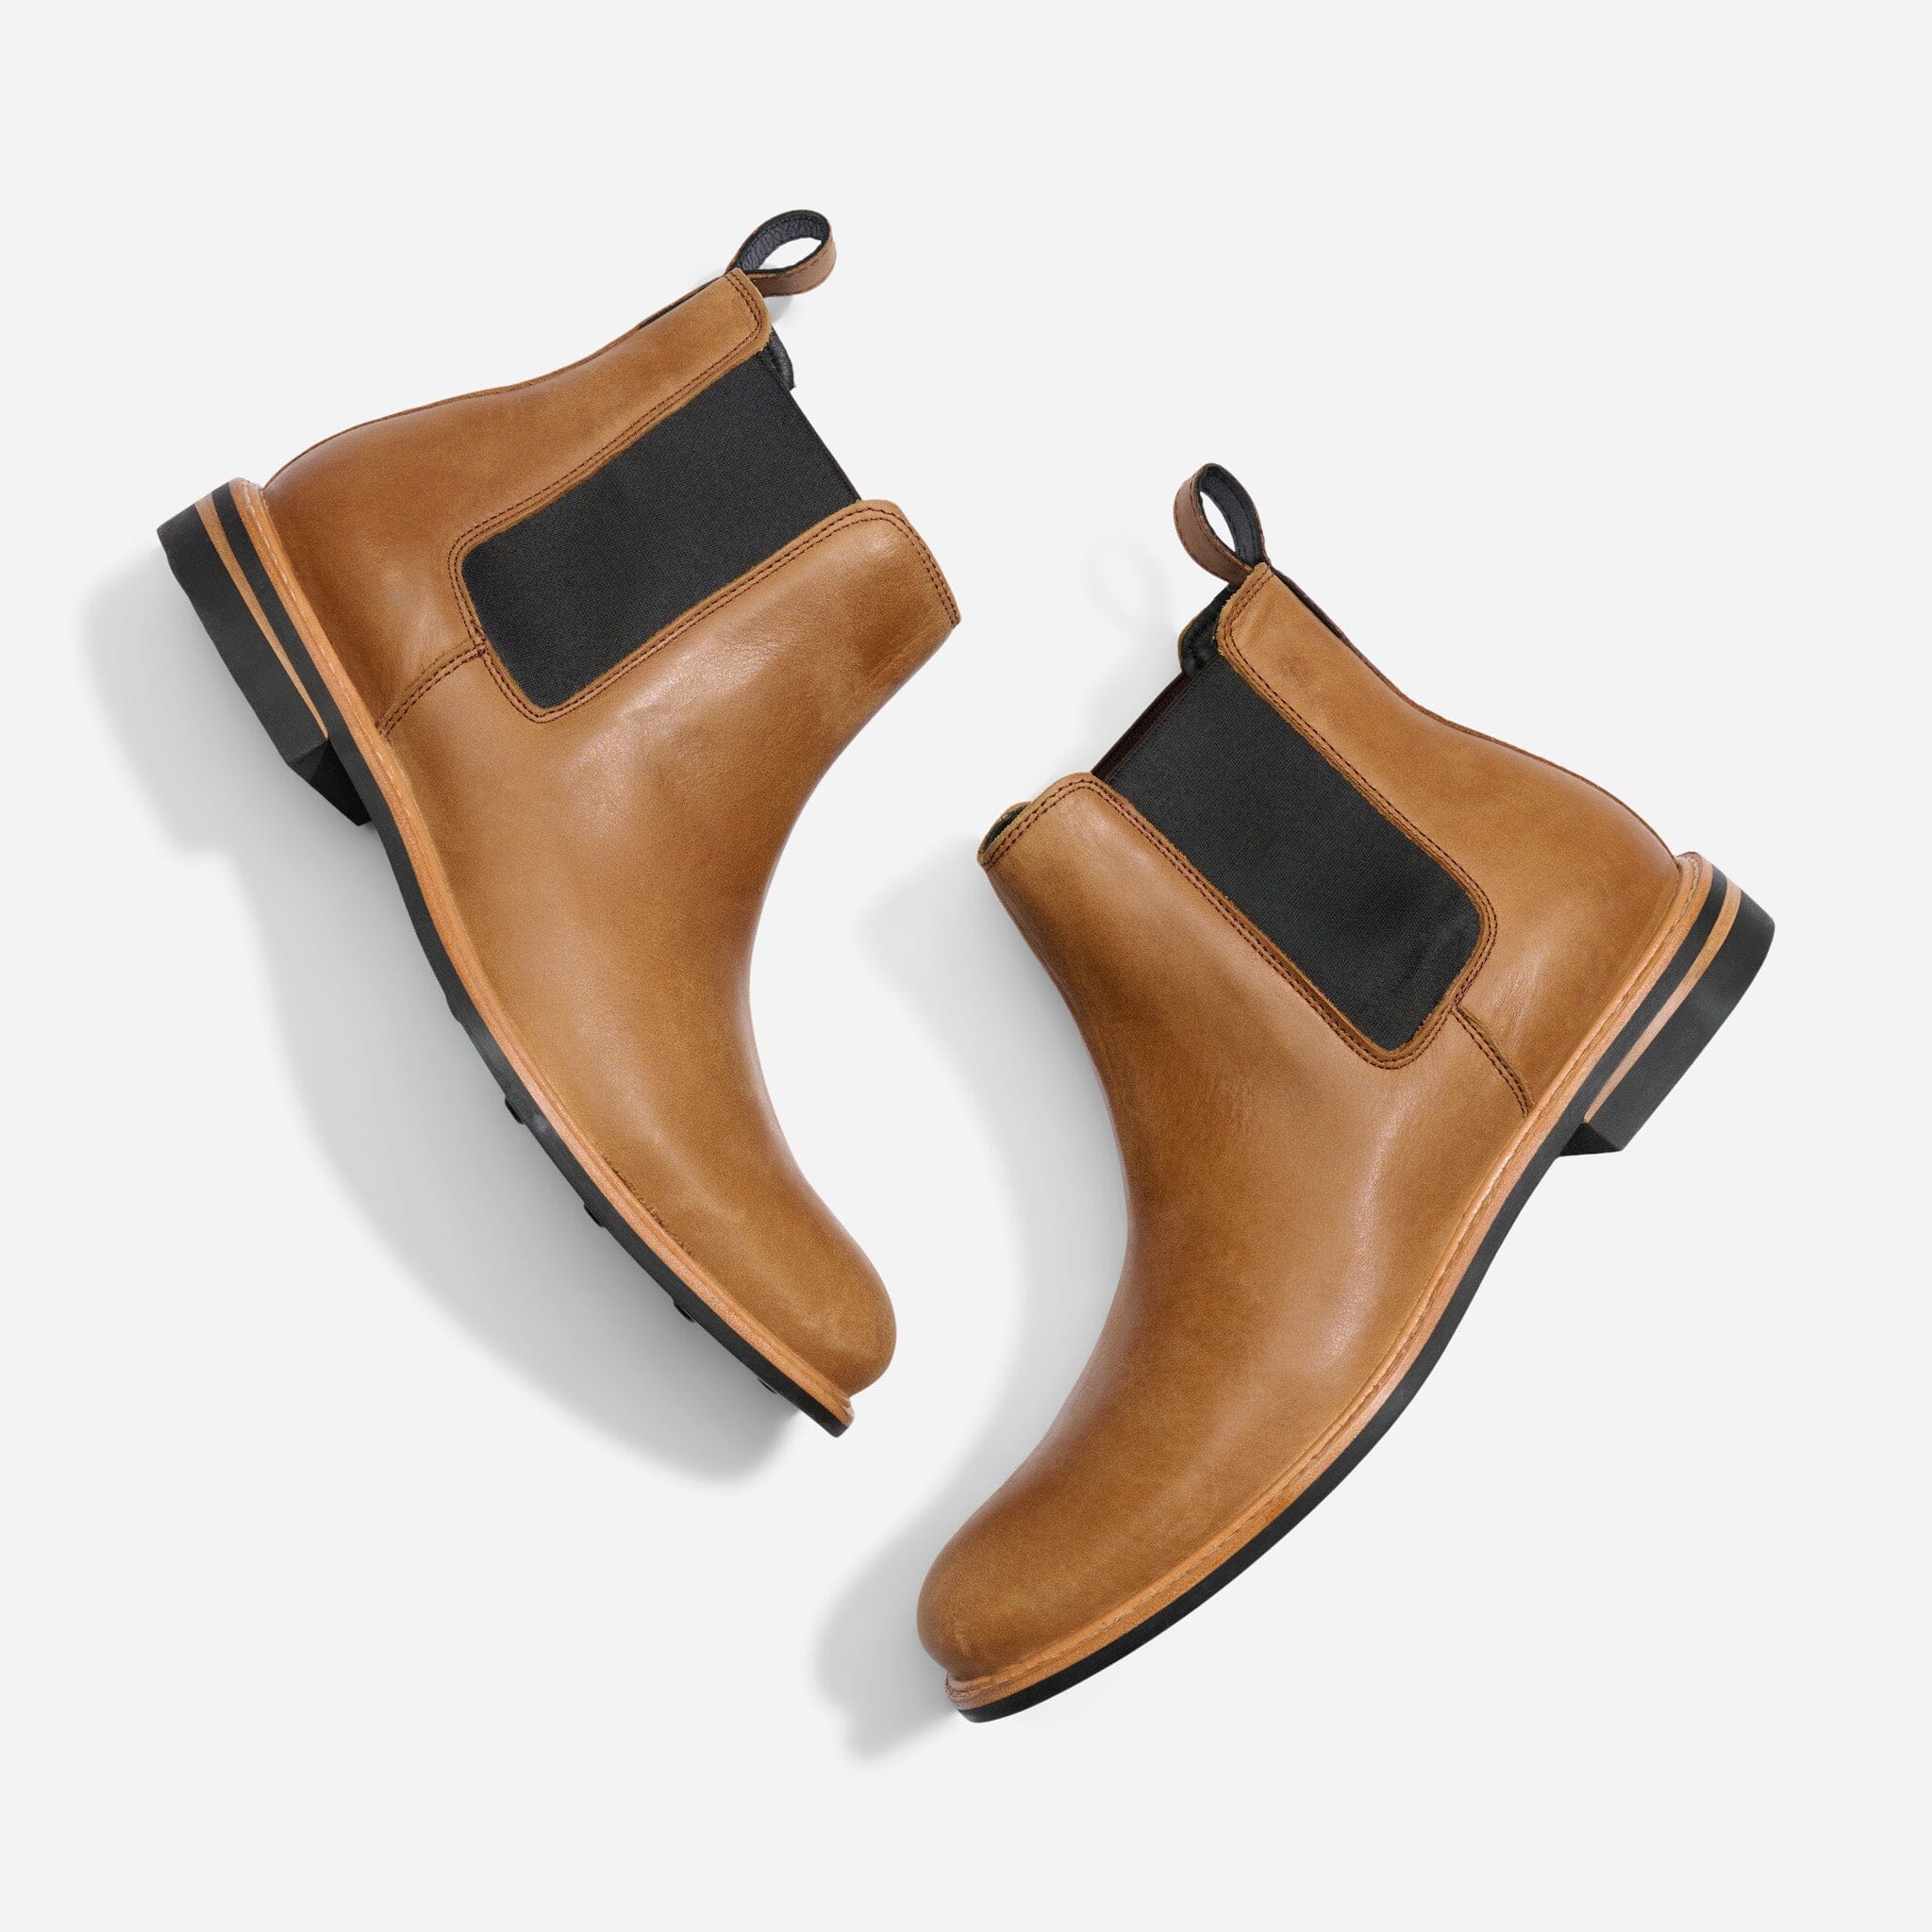 The Best Men's Chelsea Boots To Wear Right Now